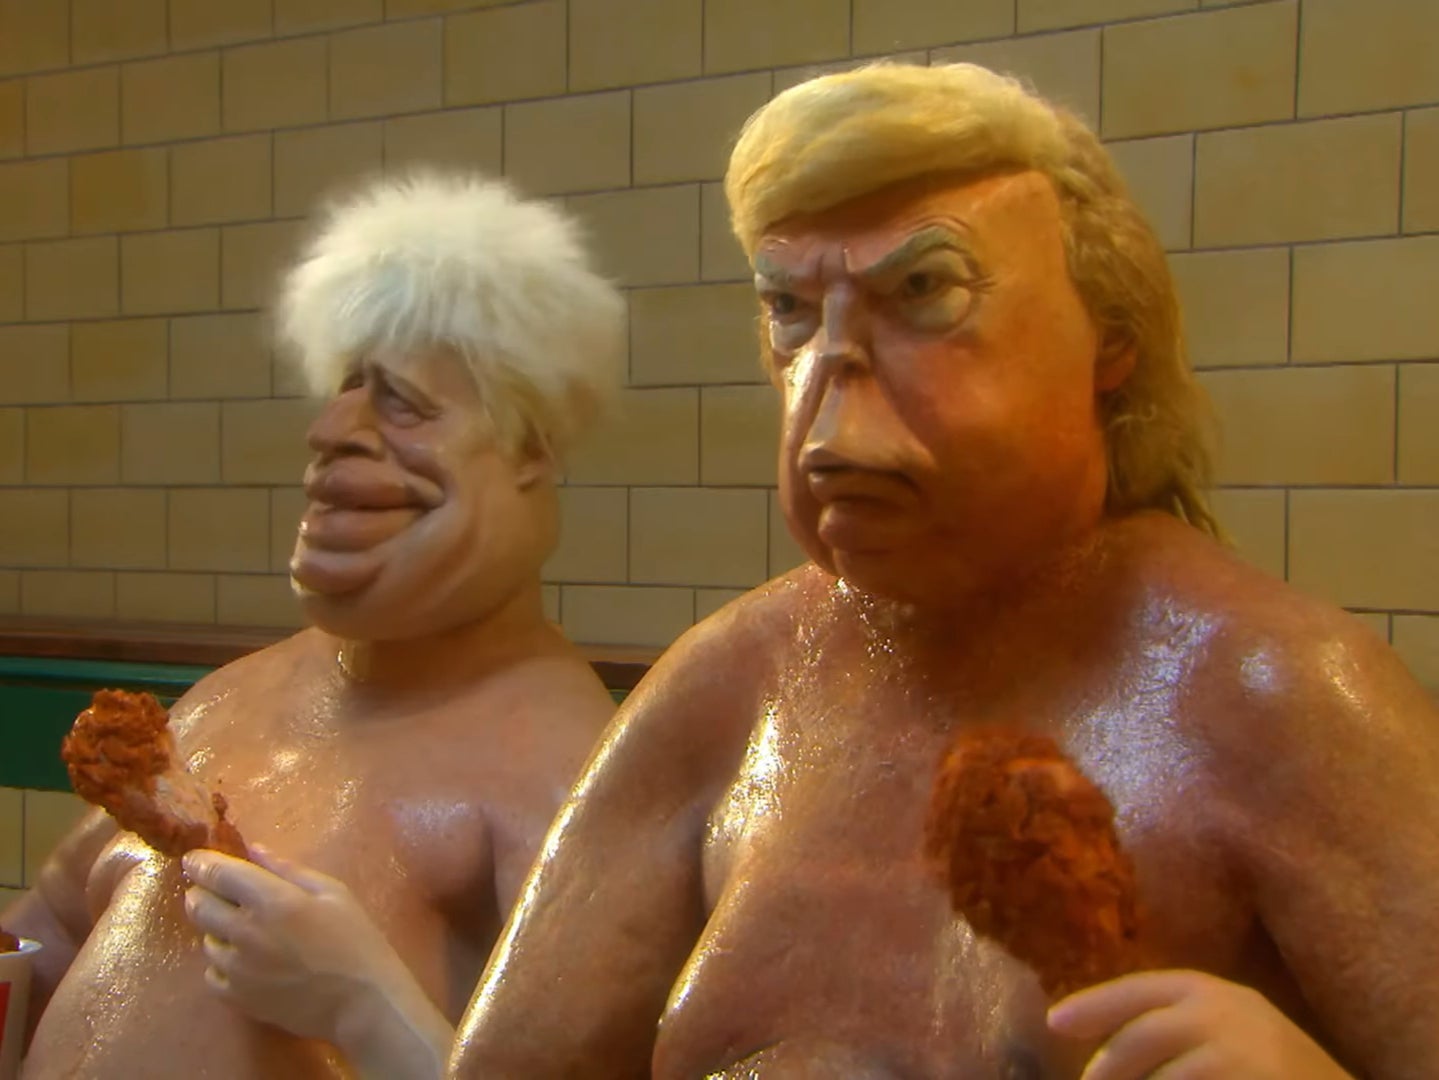 Spitting Image is back with puppets of Boris Johnson (left) and Donald Trump